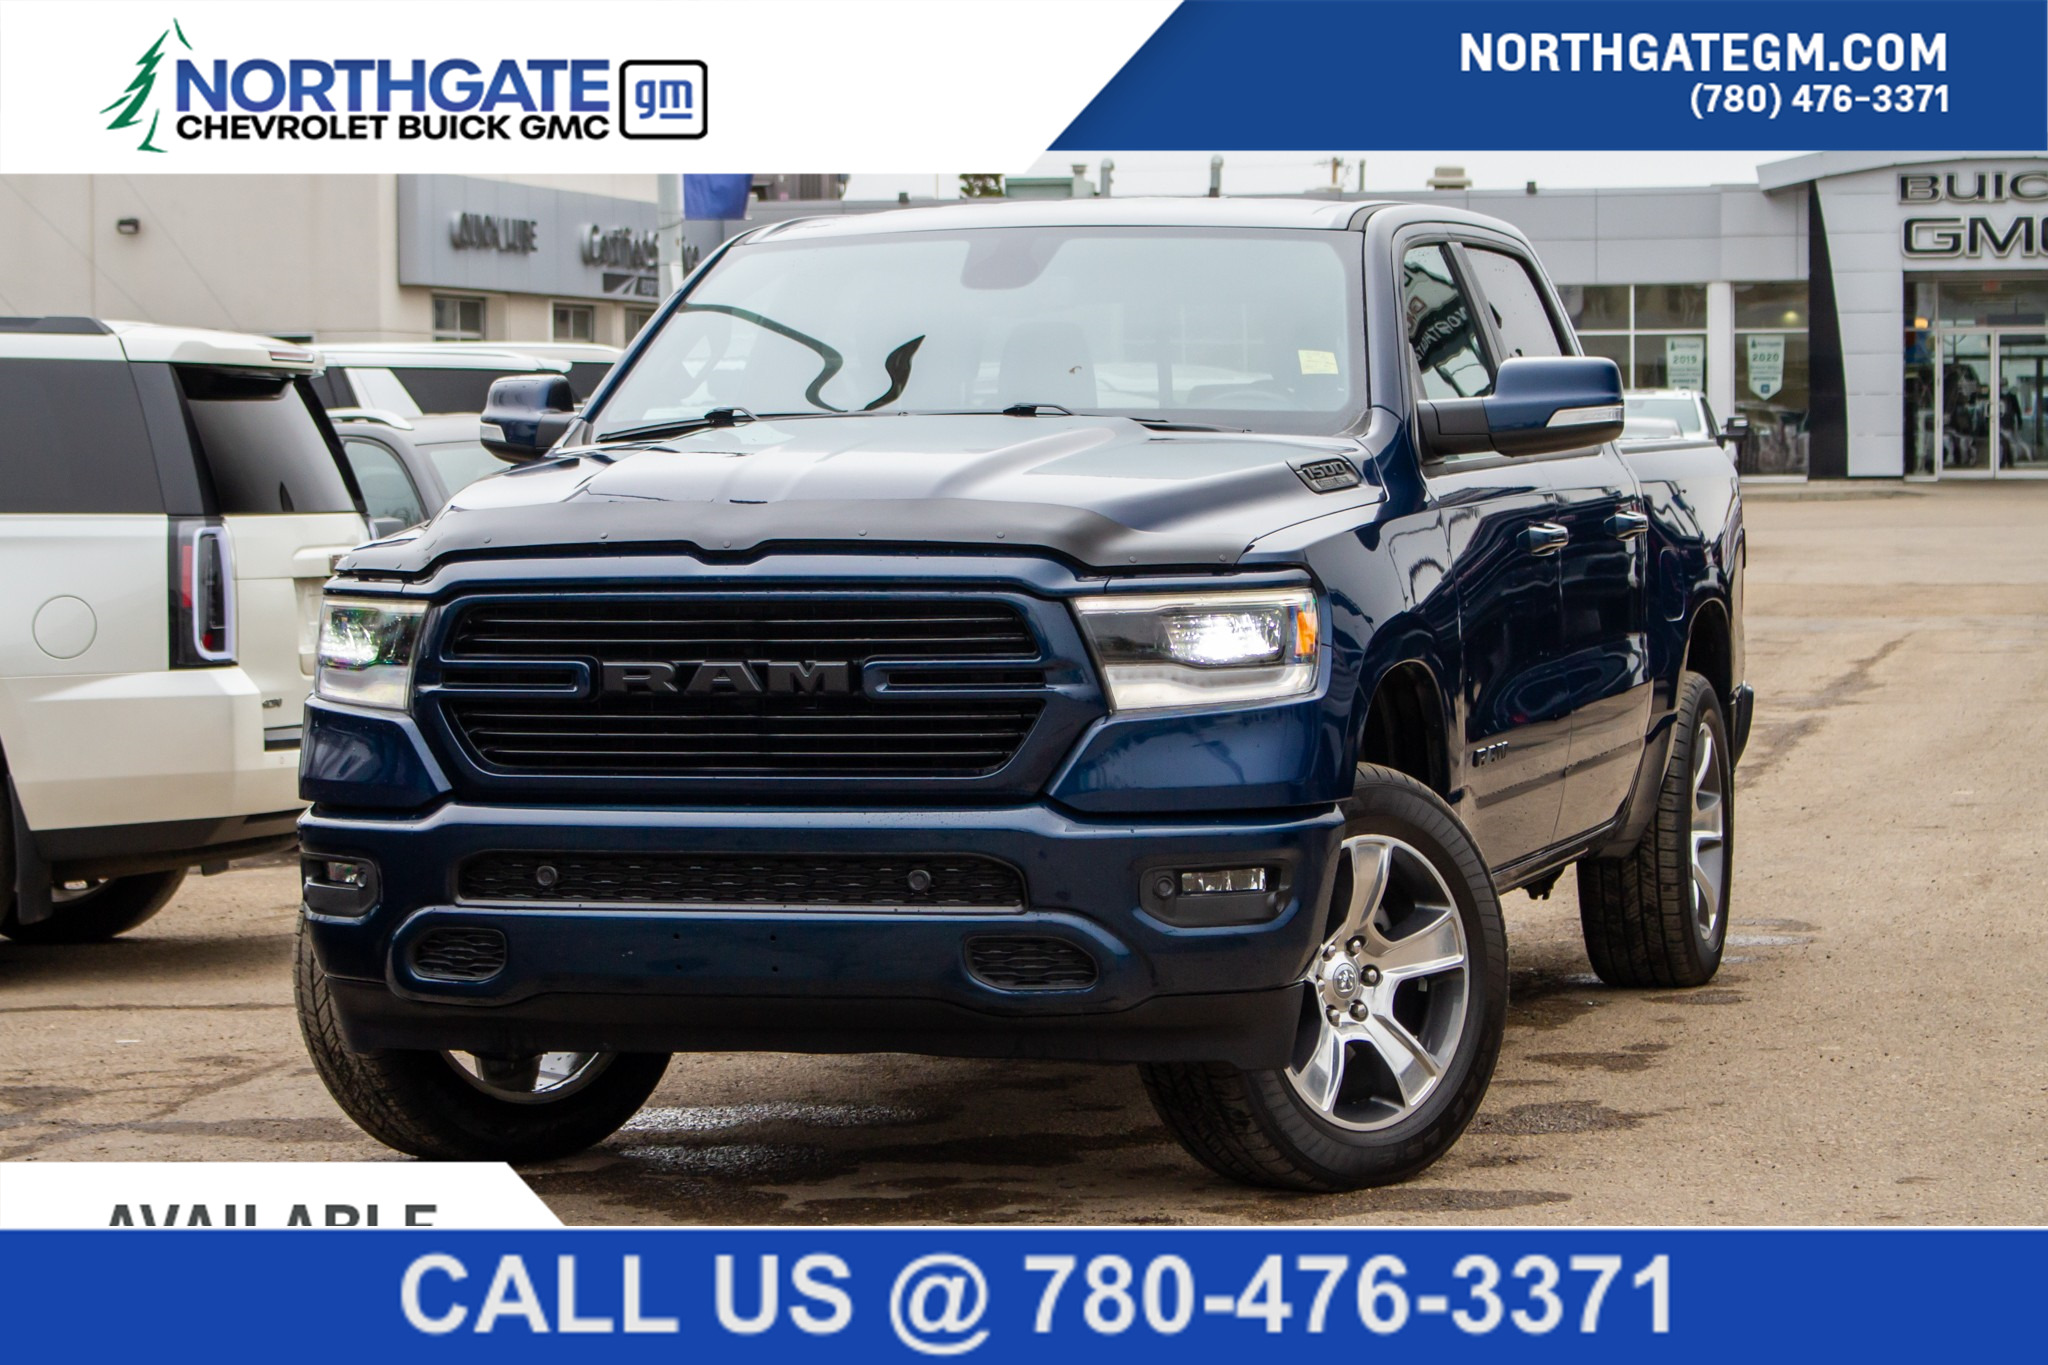 2020 Ram 1500 Sport SPORT | 5.7L | 4X4 | HEATED AND COOLED SEATS